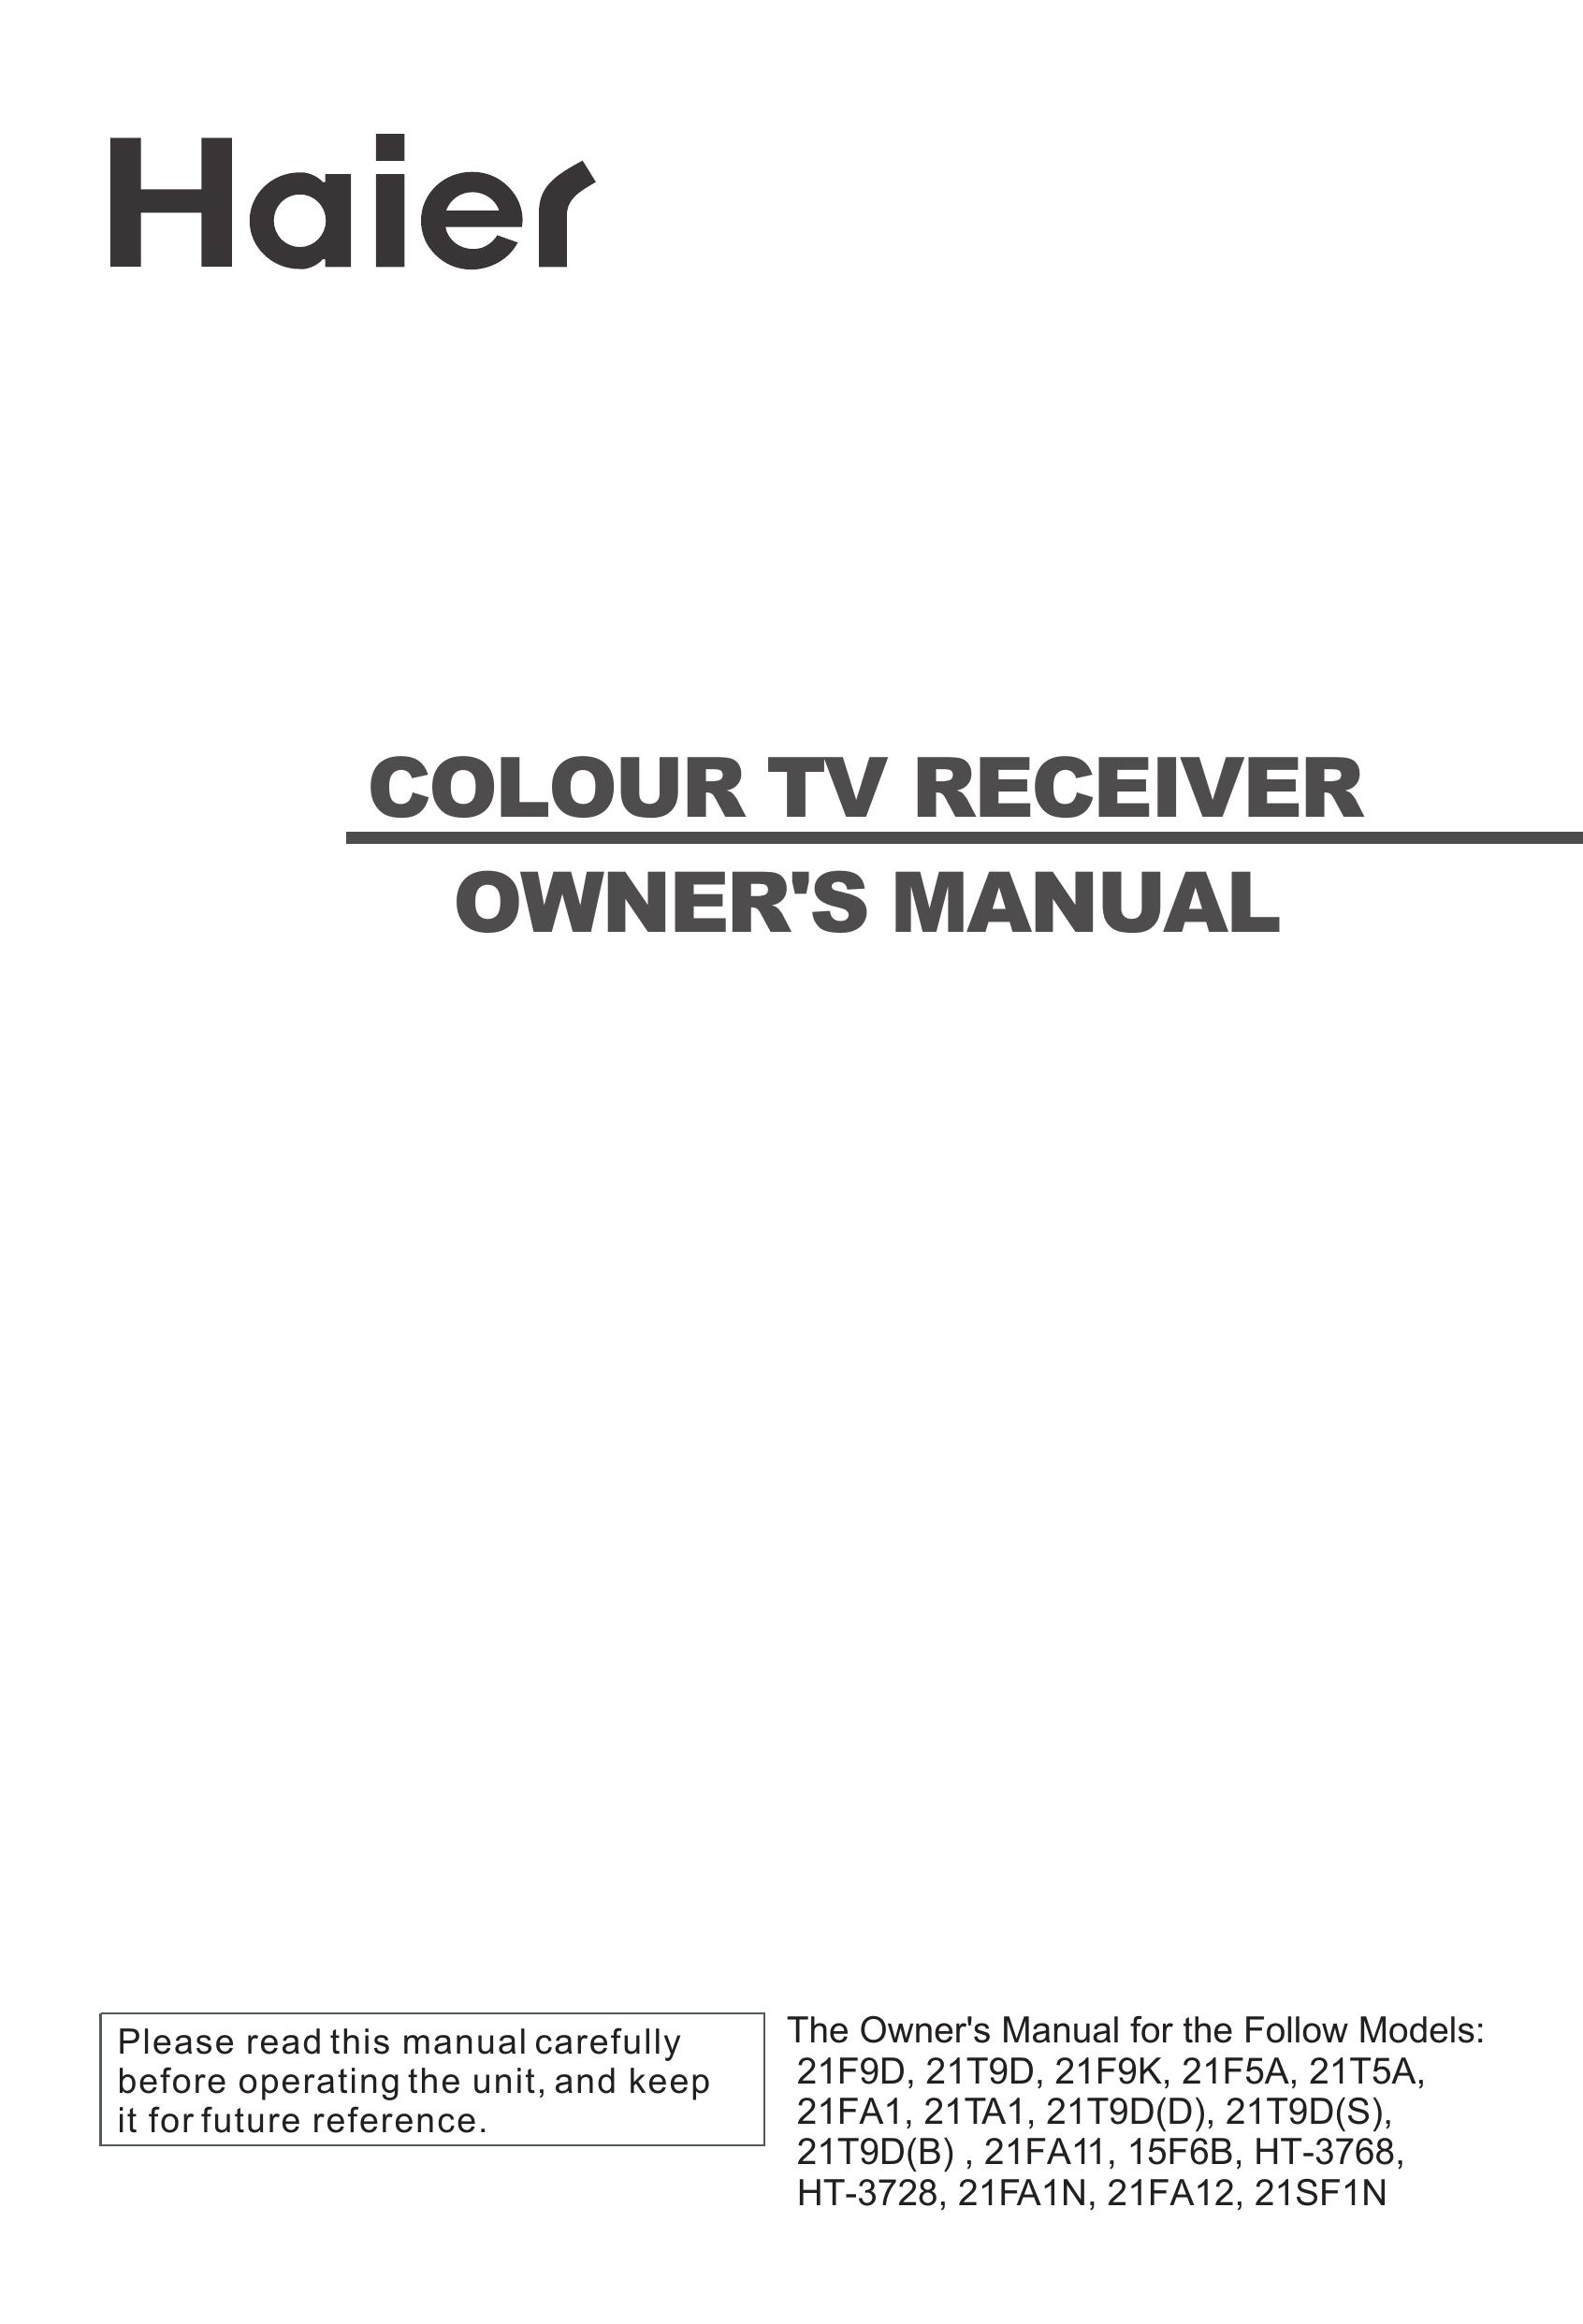 Haier 21F5A Handheld TV User Manual (Page 1)